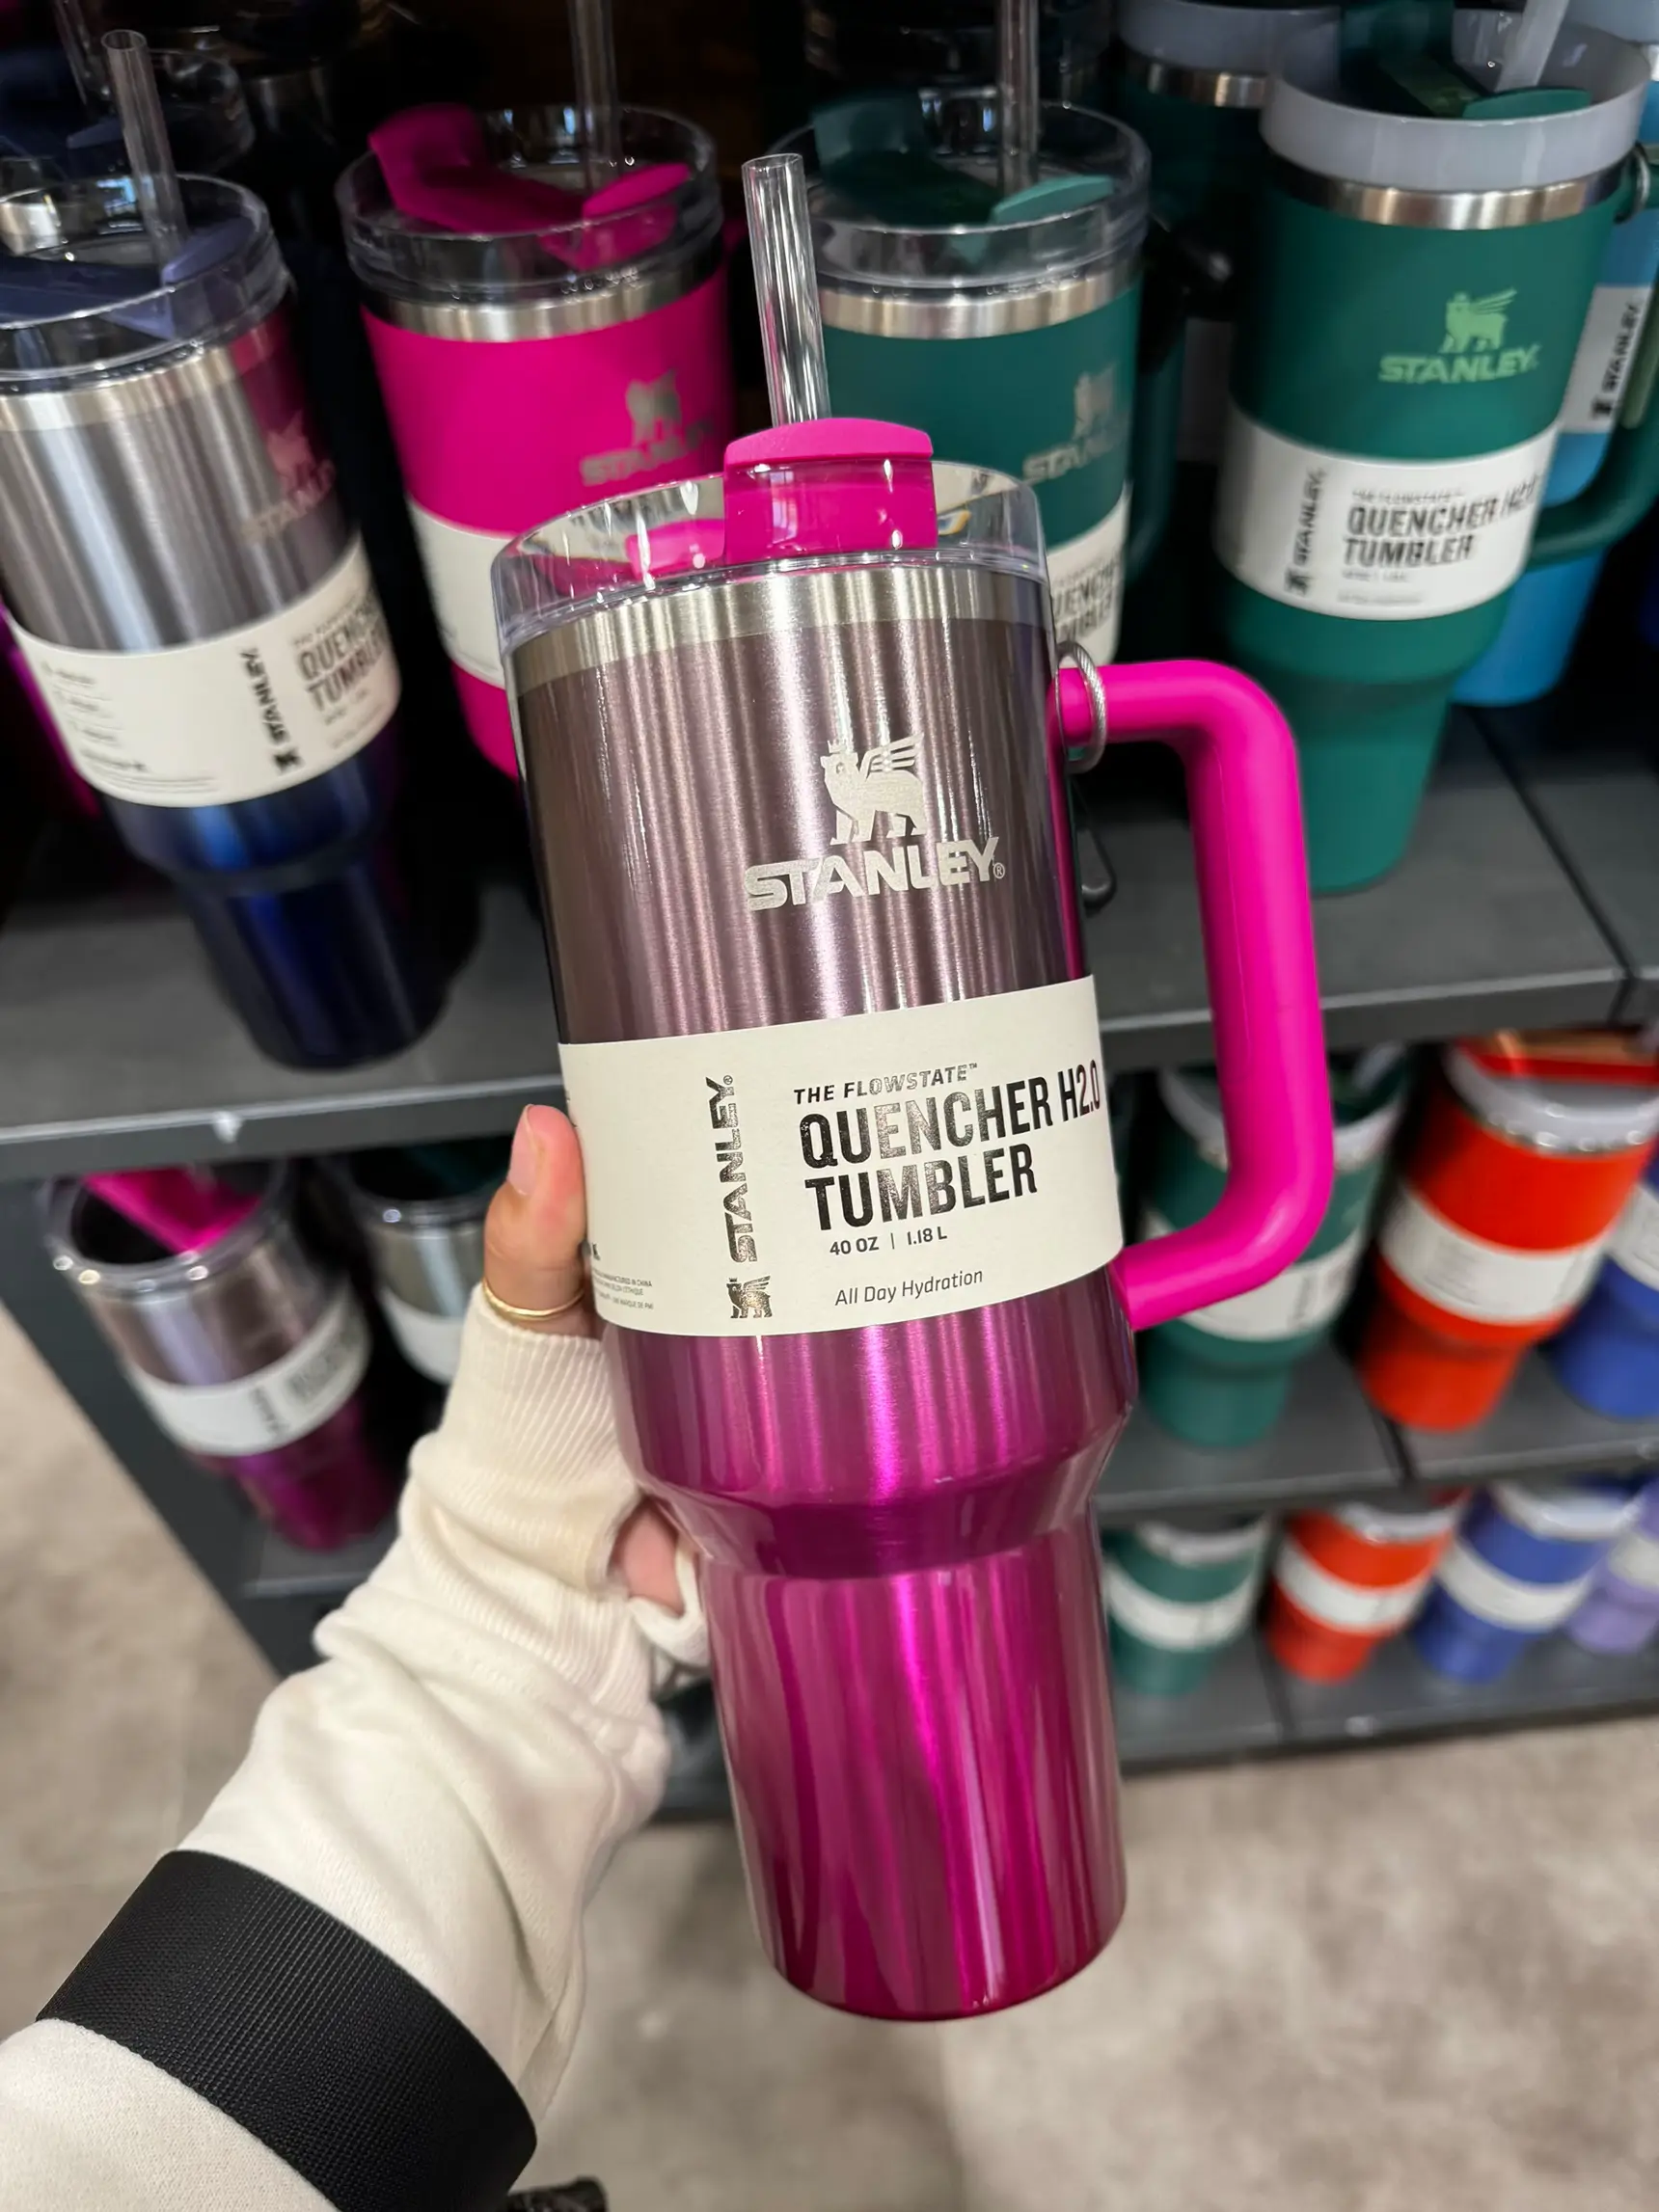 Meet Camelia Gradient DSG newest Stanley . Not sure when the release date  is but it has been found in store. The cup does show up on DSG…